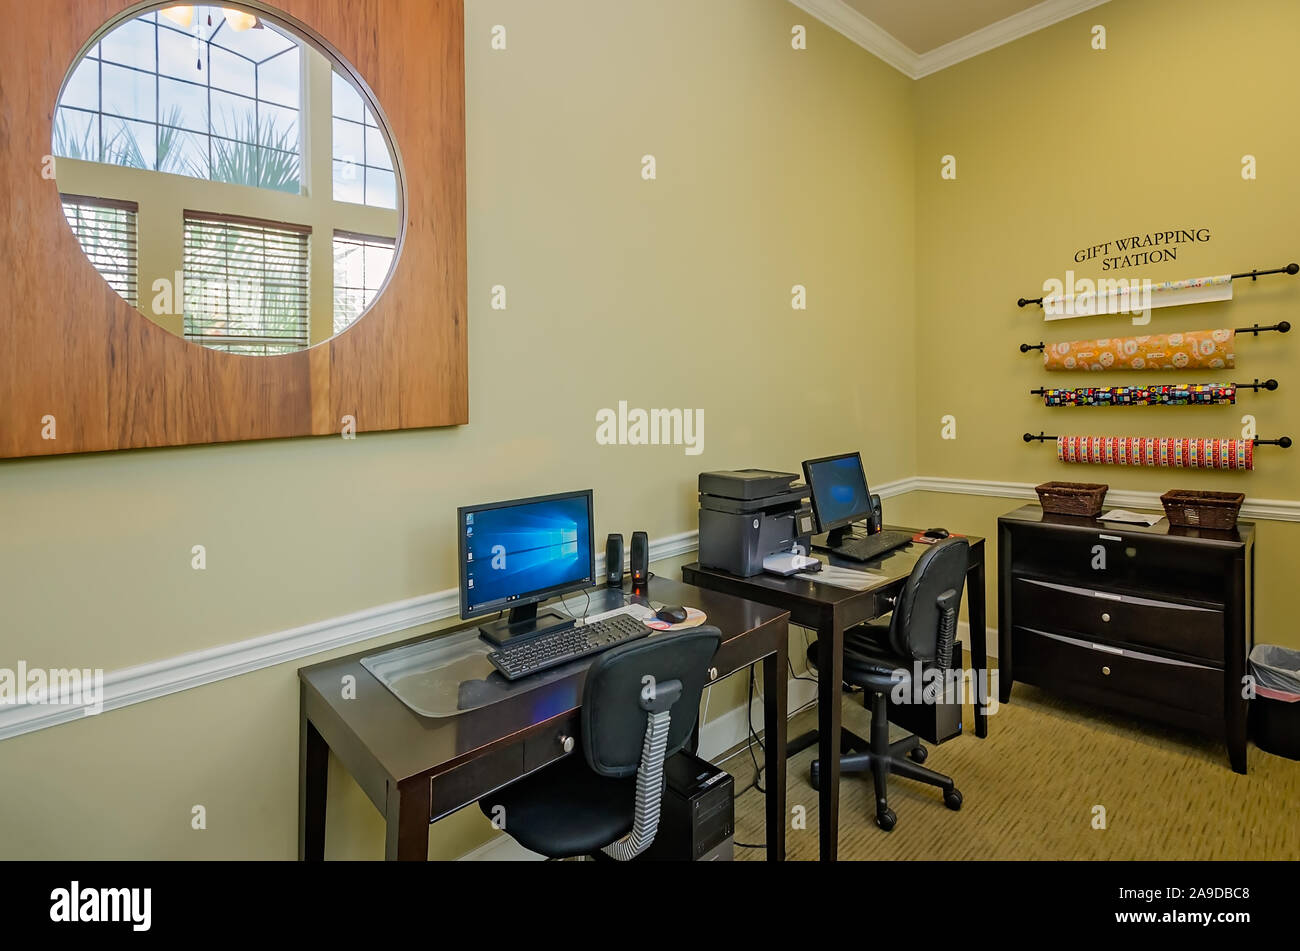 The clubhouse includes a business center with computers and a gift-wrapping station for residents at Cypress Cove Apartment Homes in Mobile, Alabama. Stock Photo